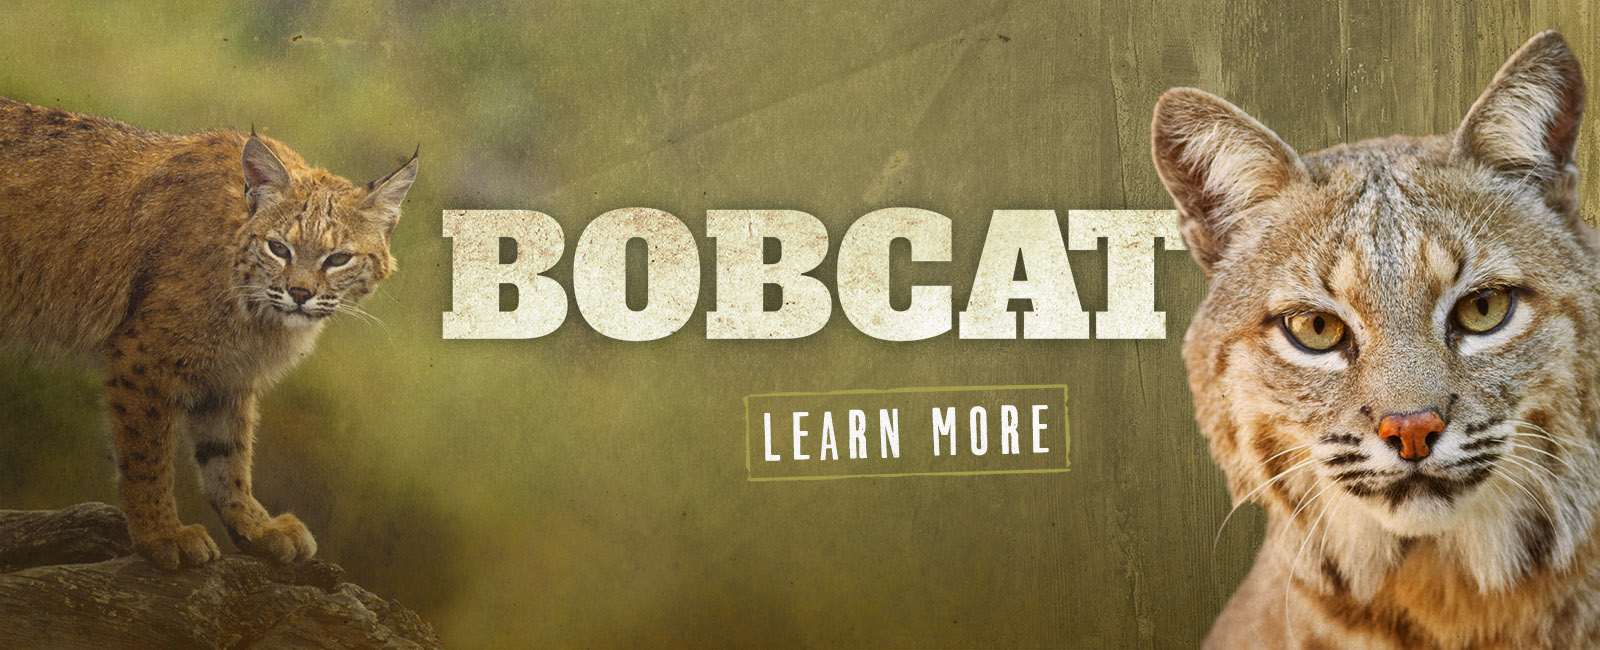 Learn more about Bobcats